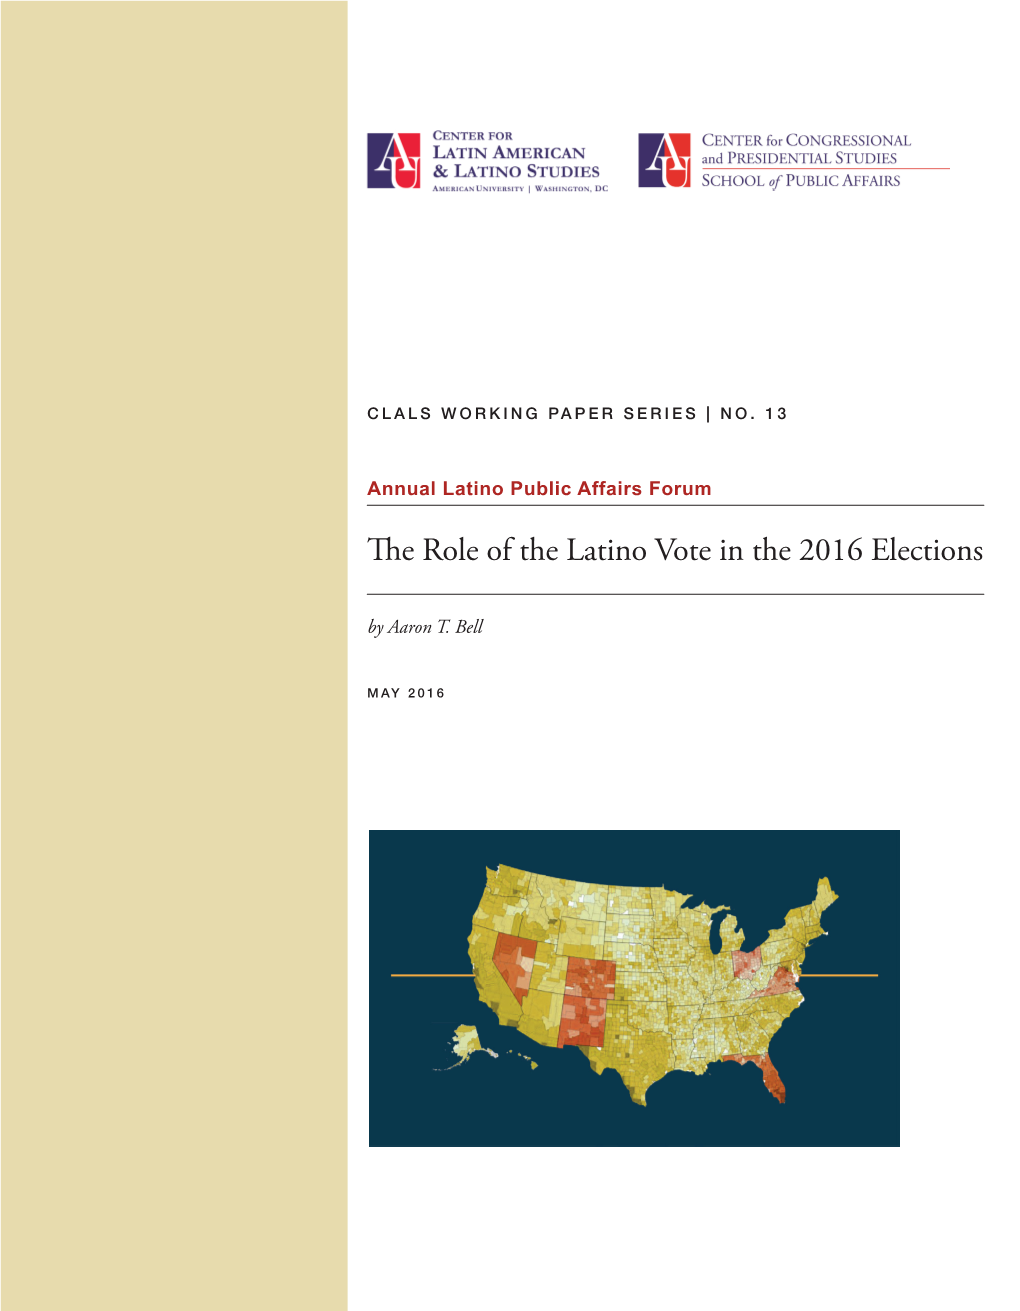 The Role of the Latino Vote in the 2016 Elections by Aaron T